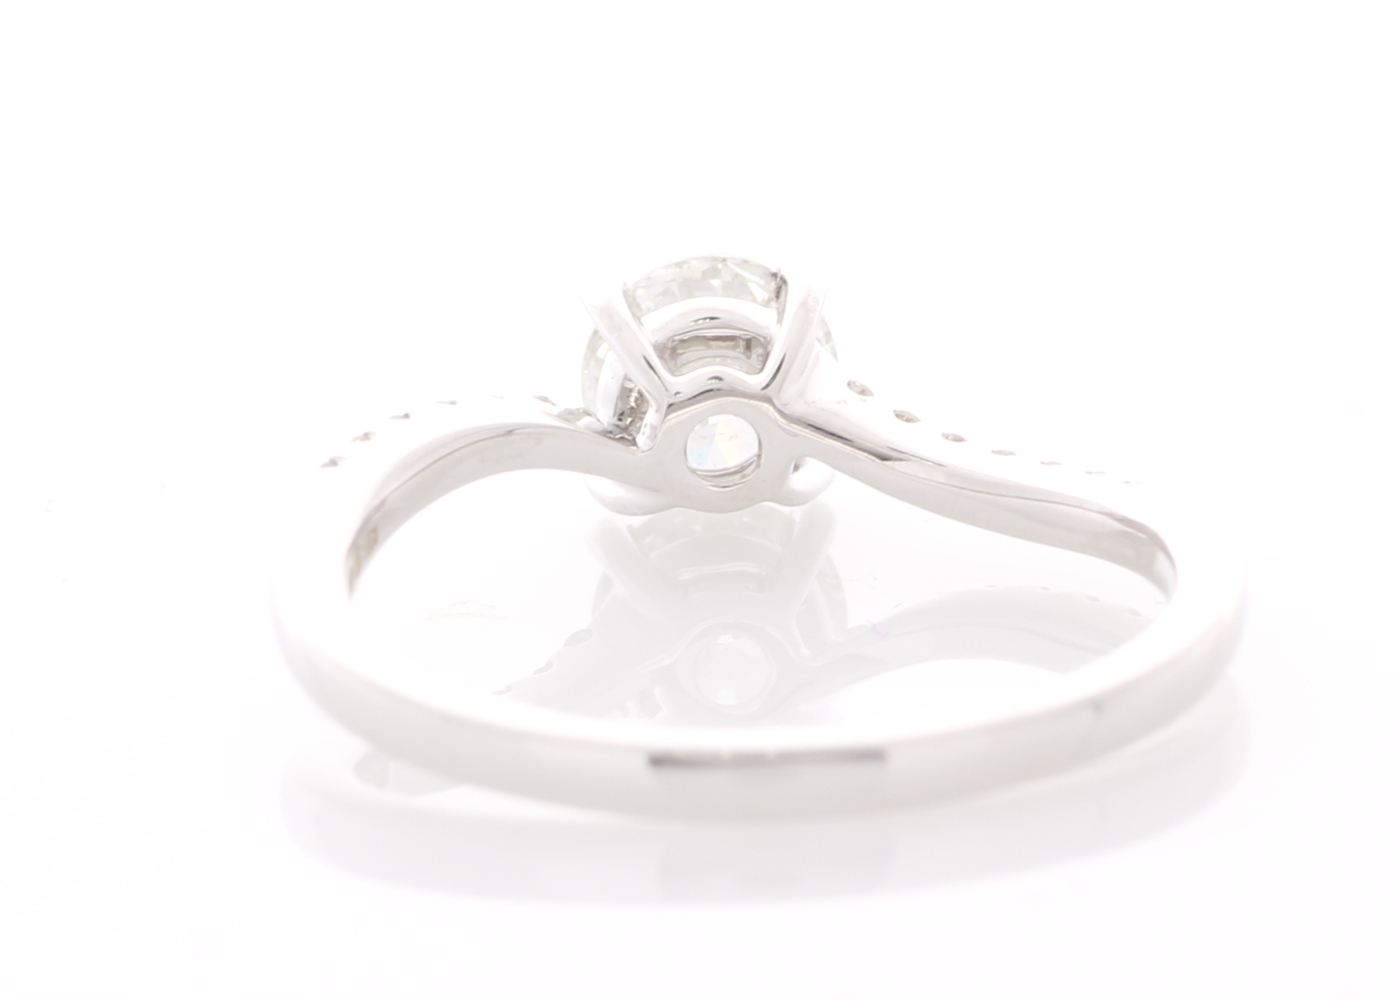 18ct White Gold Prong Set With Stone Set Shoulders Diamond Ring 0.73 Carats - Image 3 of 6